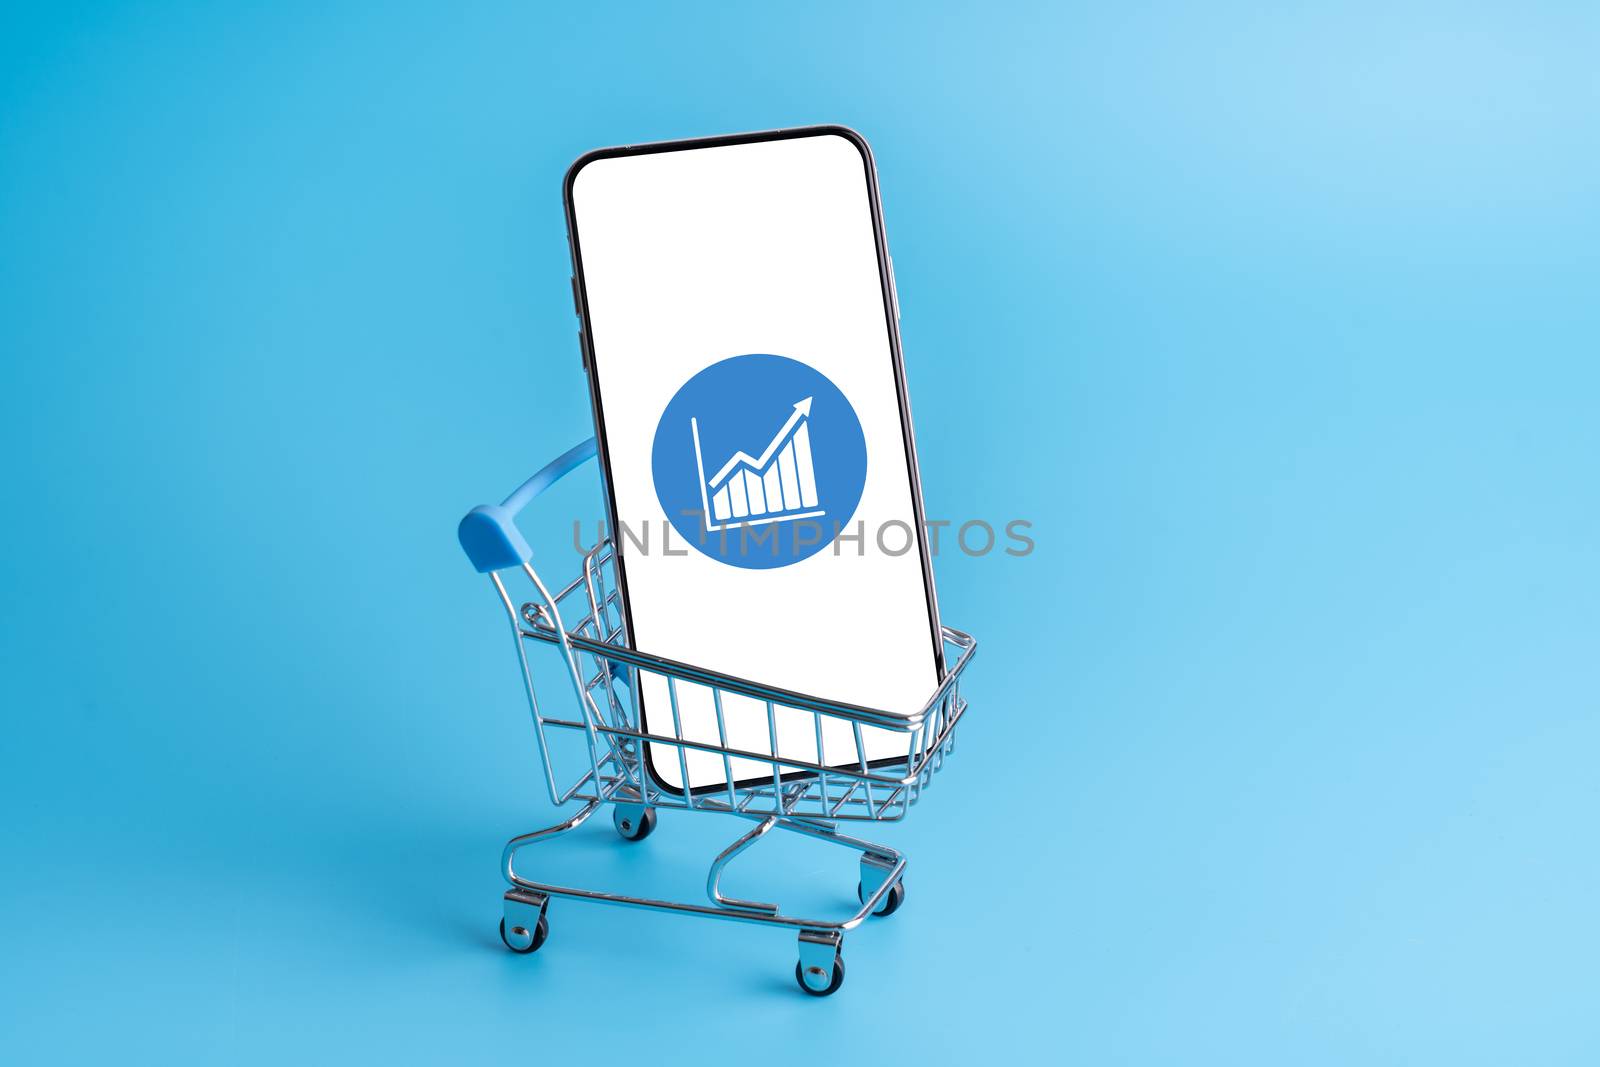 Online shopping & cloud icon on mobile phone application